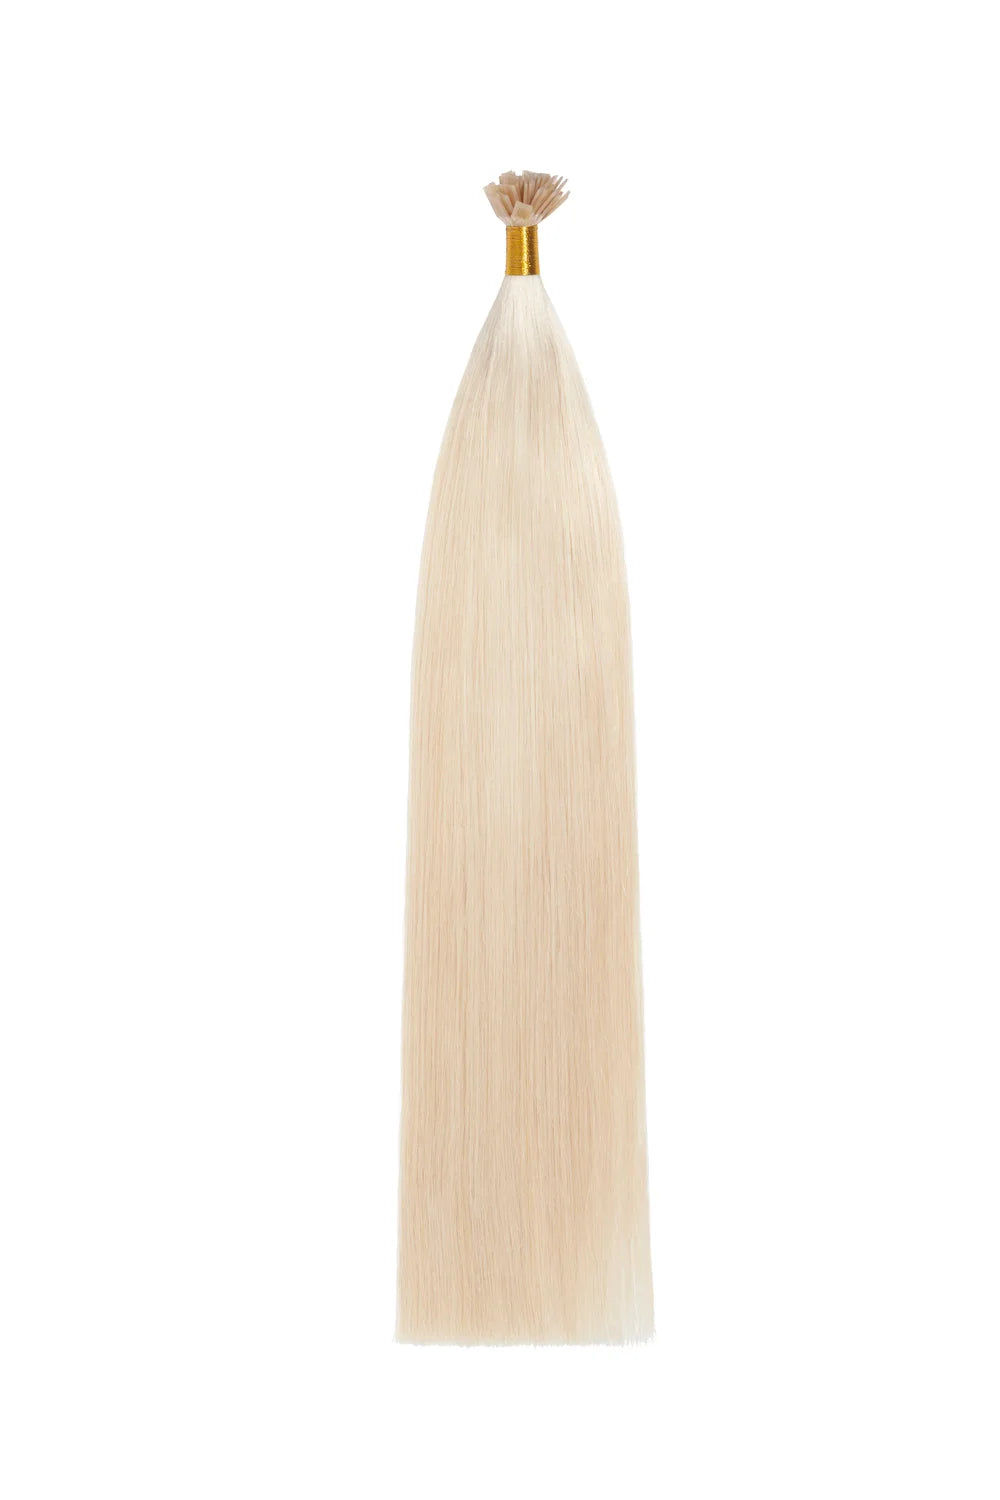 Remy Royale Flat Tip Hair Extensions